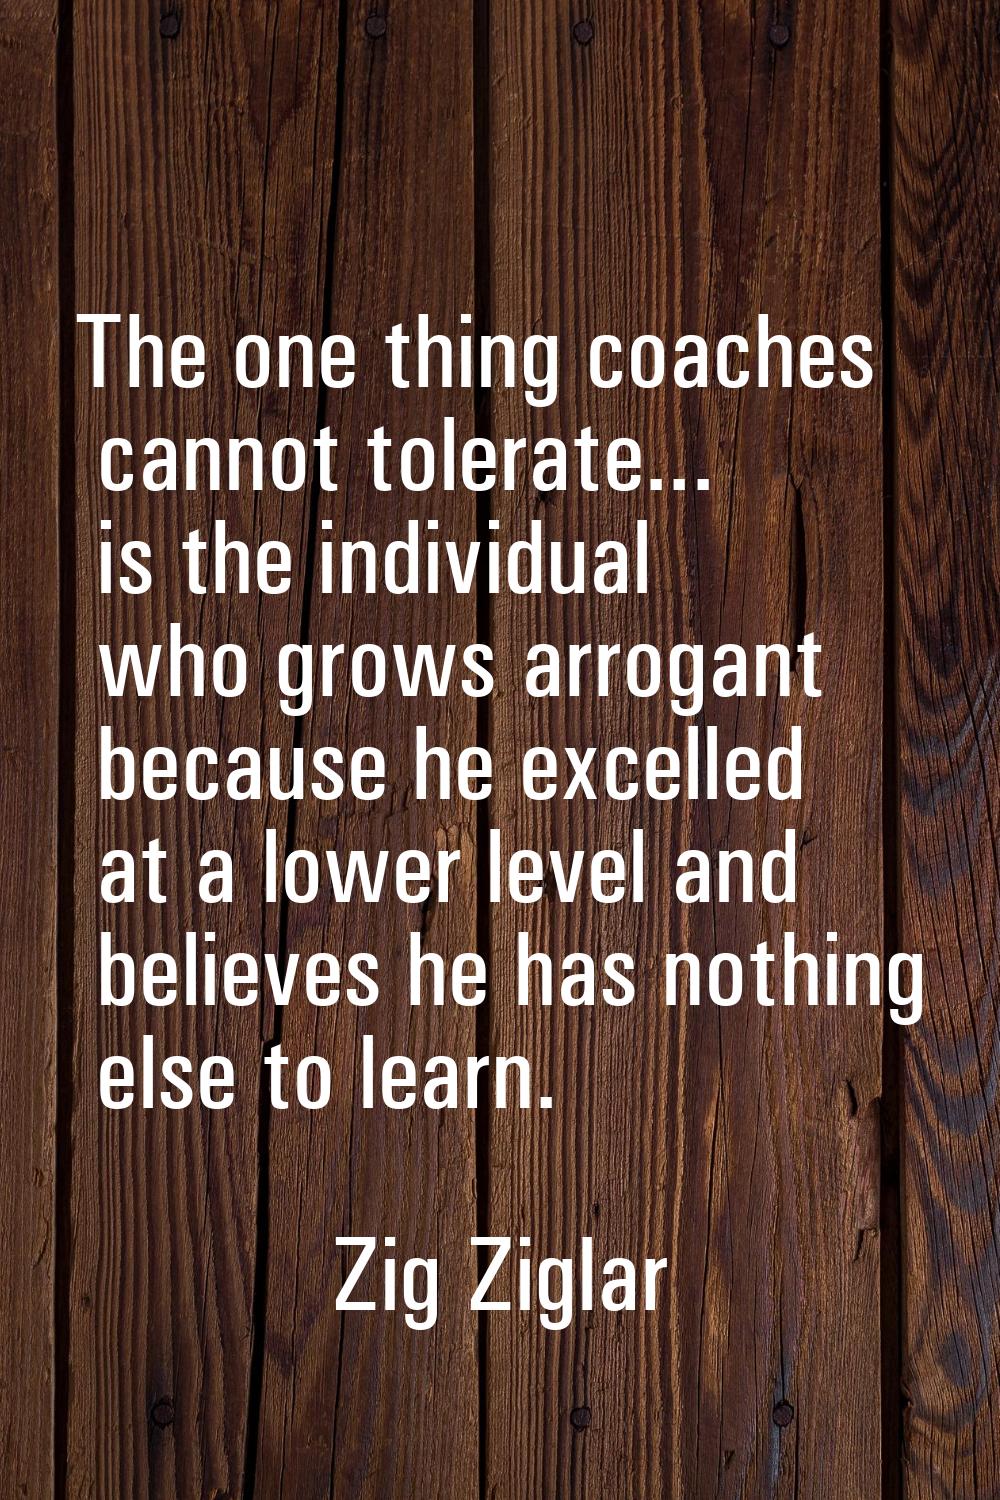 The one thing coaches cannot tolerate... is the individual who grows arrogant because he excelled a